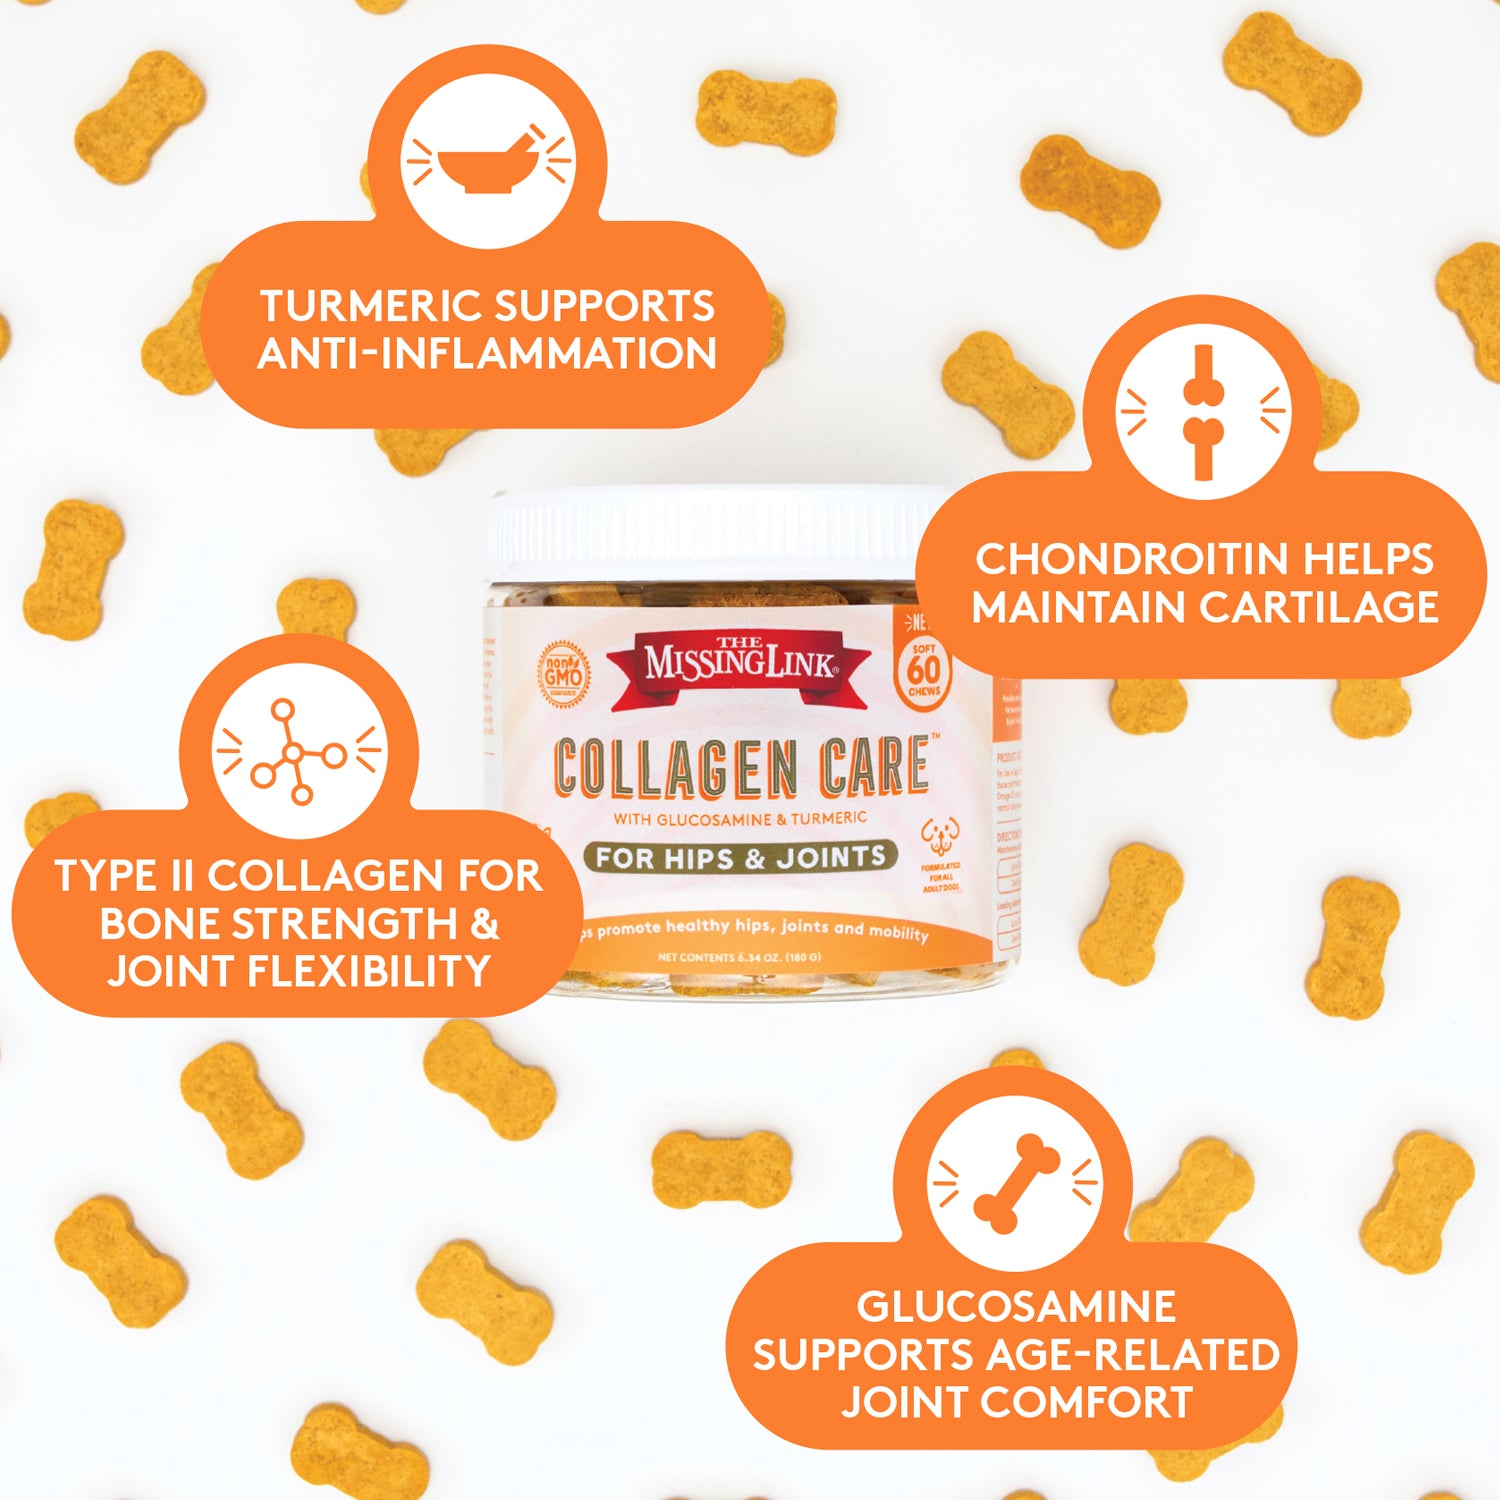 Collagen Care cycle; turmeric supports anti-inflamation.  Chondroitin helps maintain cartilage.  Type 2 collagen for bone strength & joint flexiblity.  Glucosamine supports age-related joint comfort.